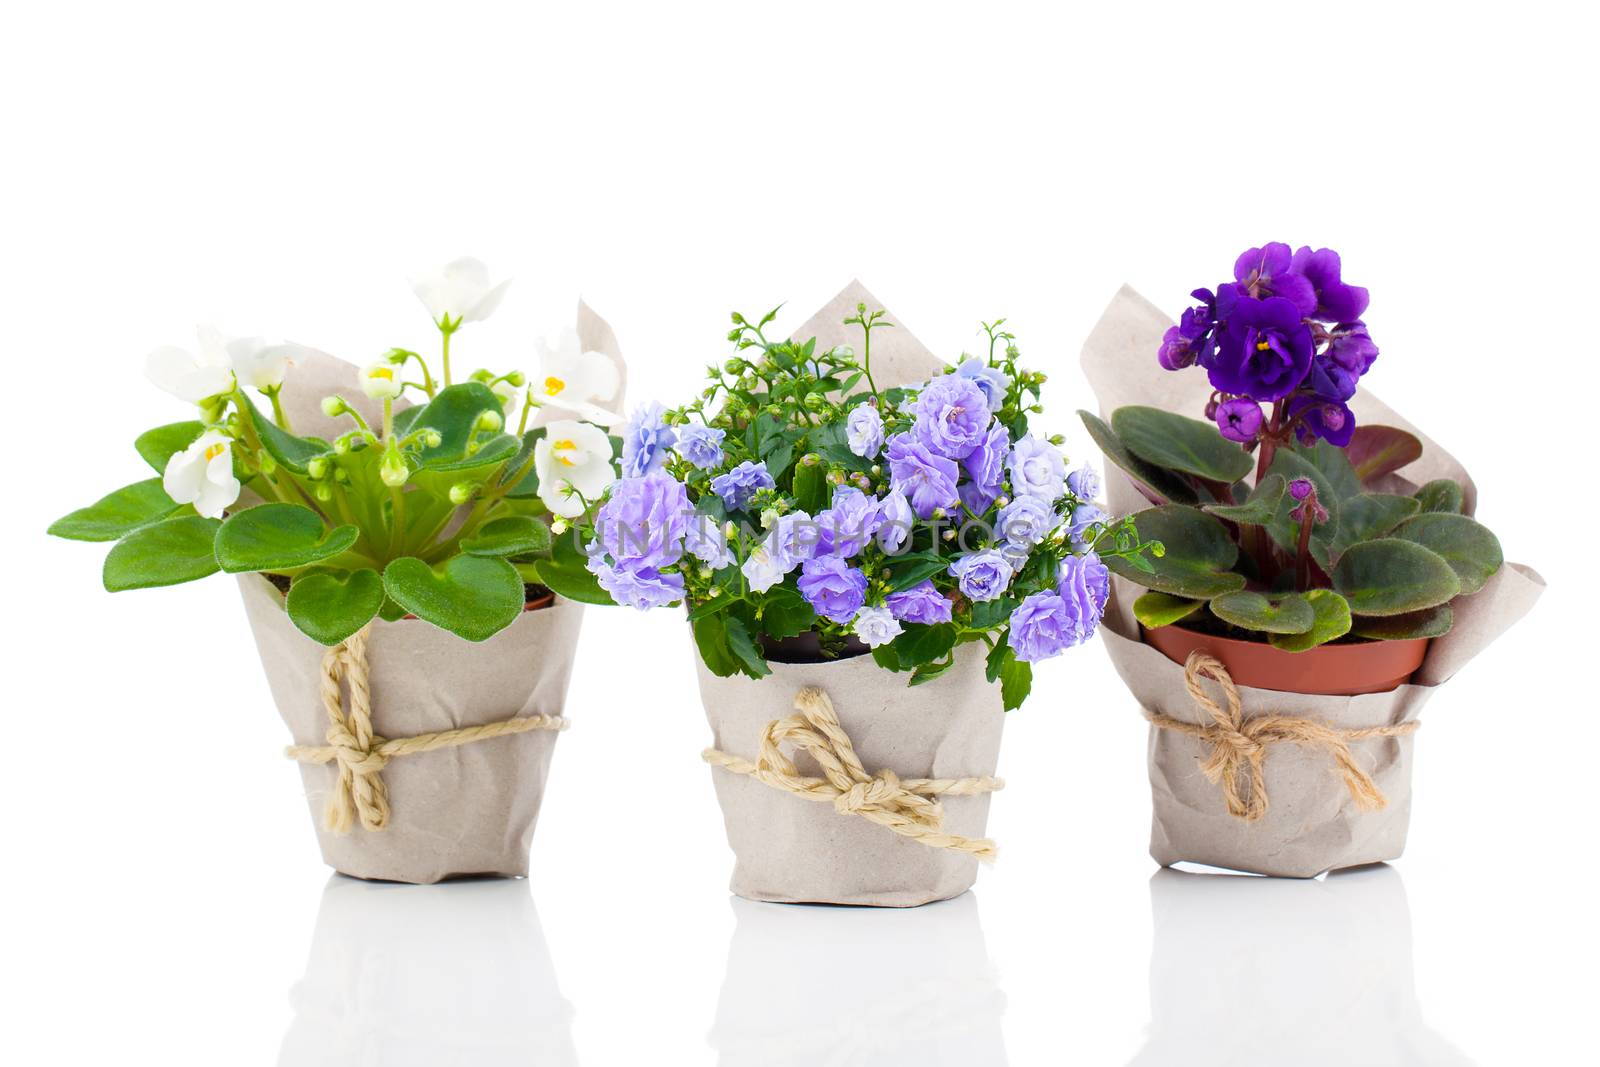 blue Campanula terry, blue and white Saintpaulias flowers in pap by motorolka